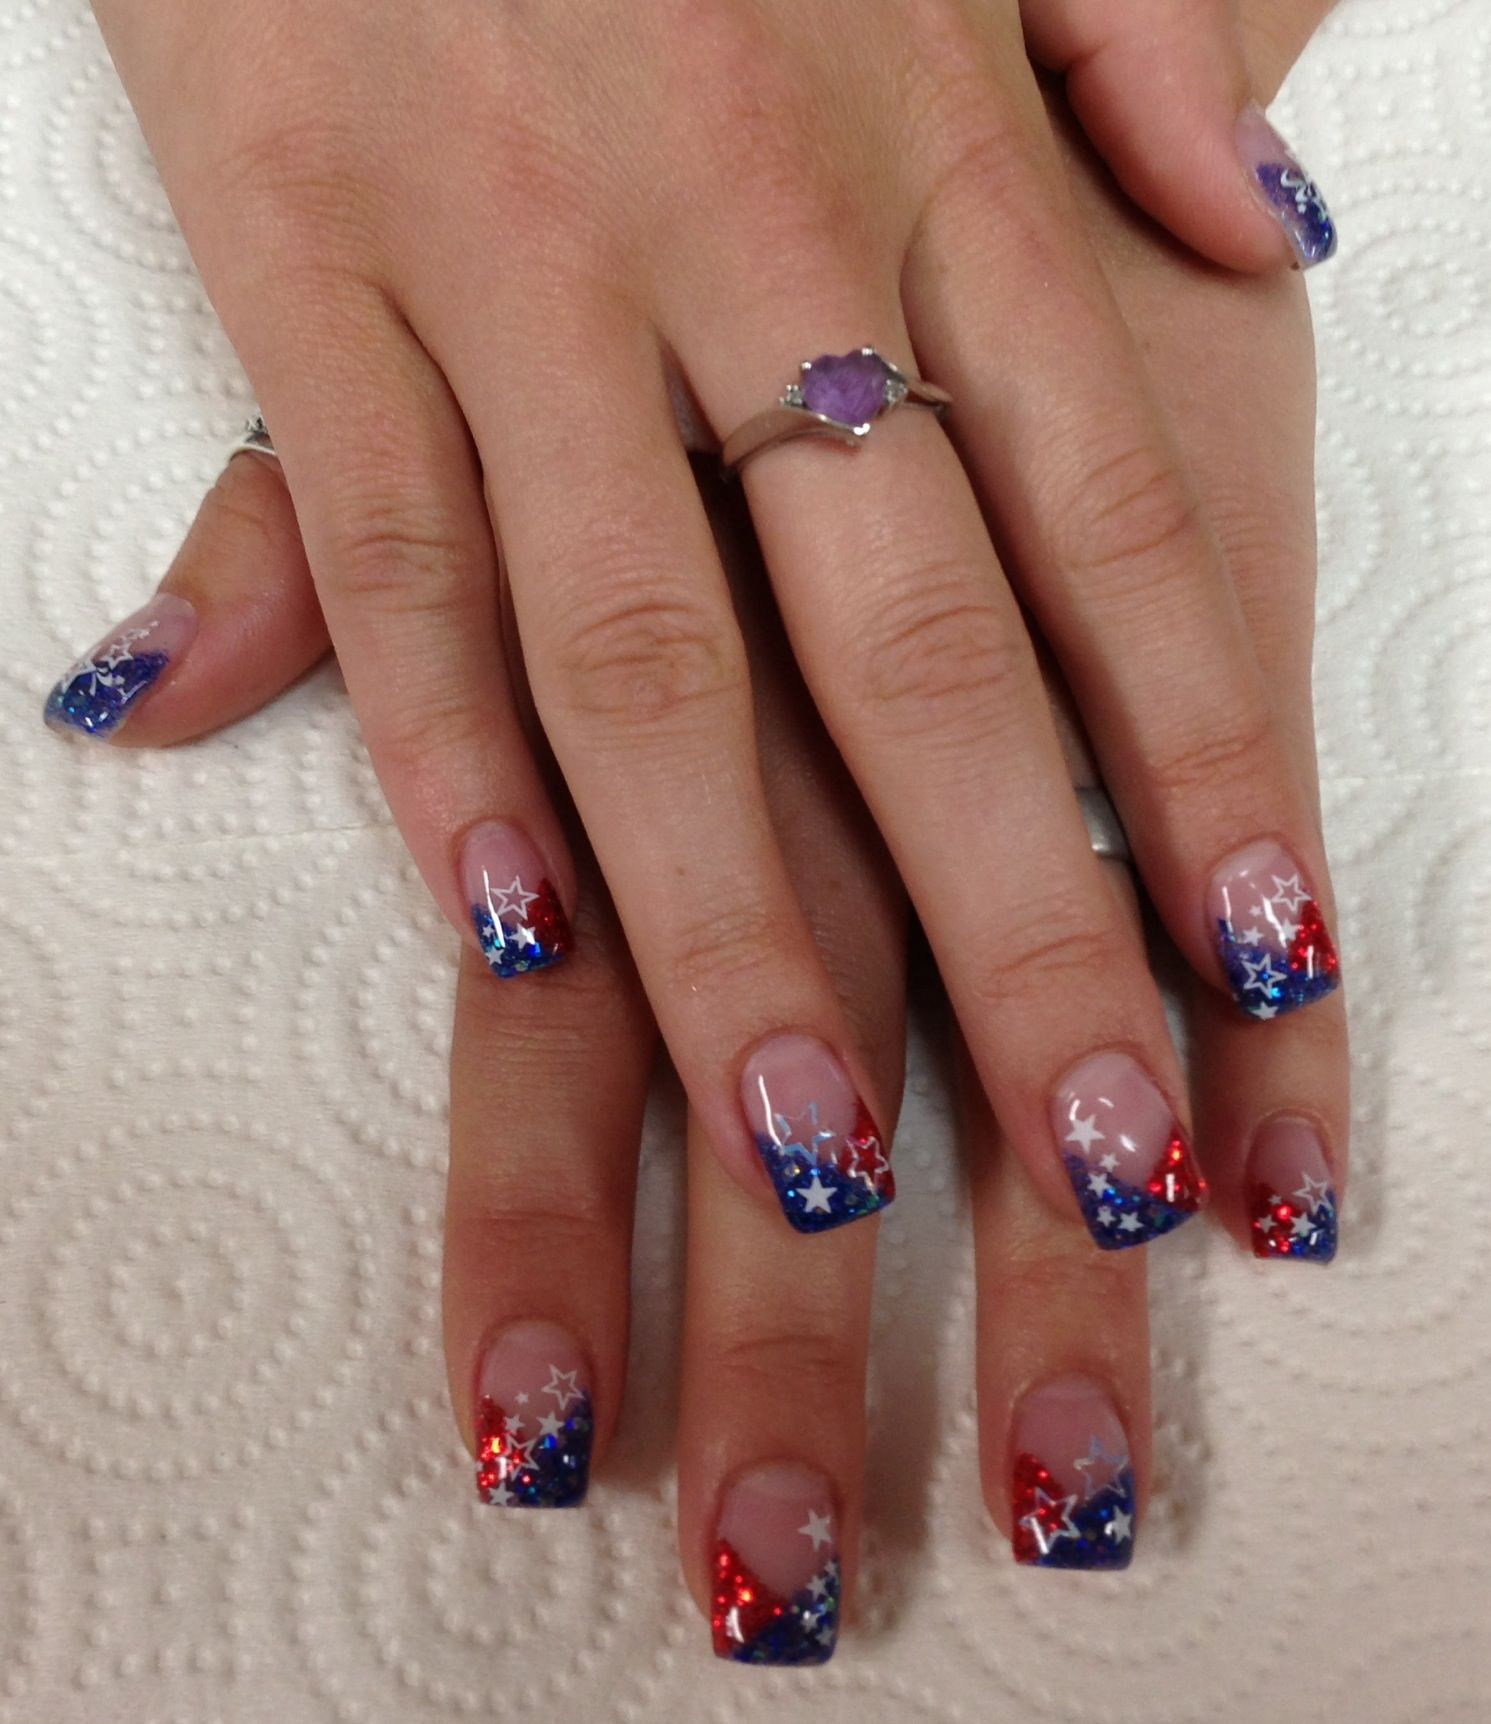 Red White And Blue Nail Art Designs
 American Red white & blue Gel Nails by Janee Tittensor